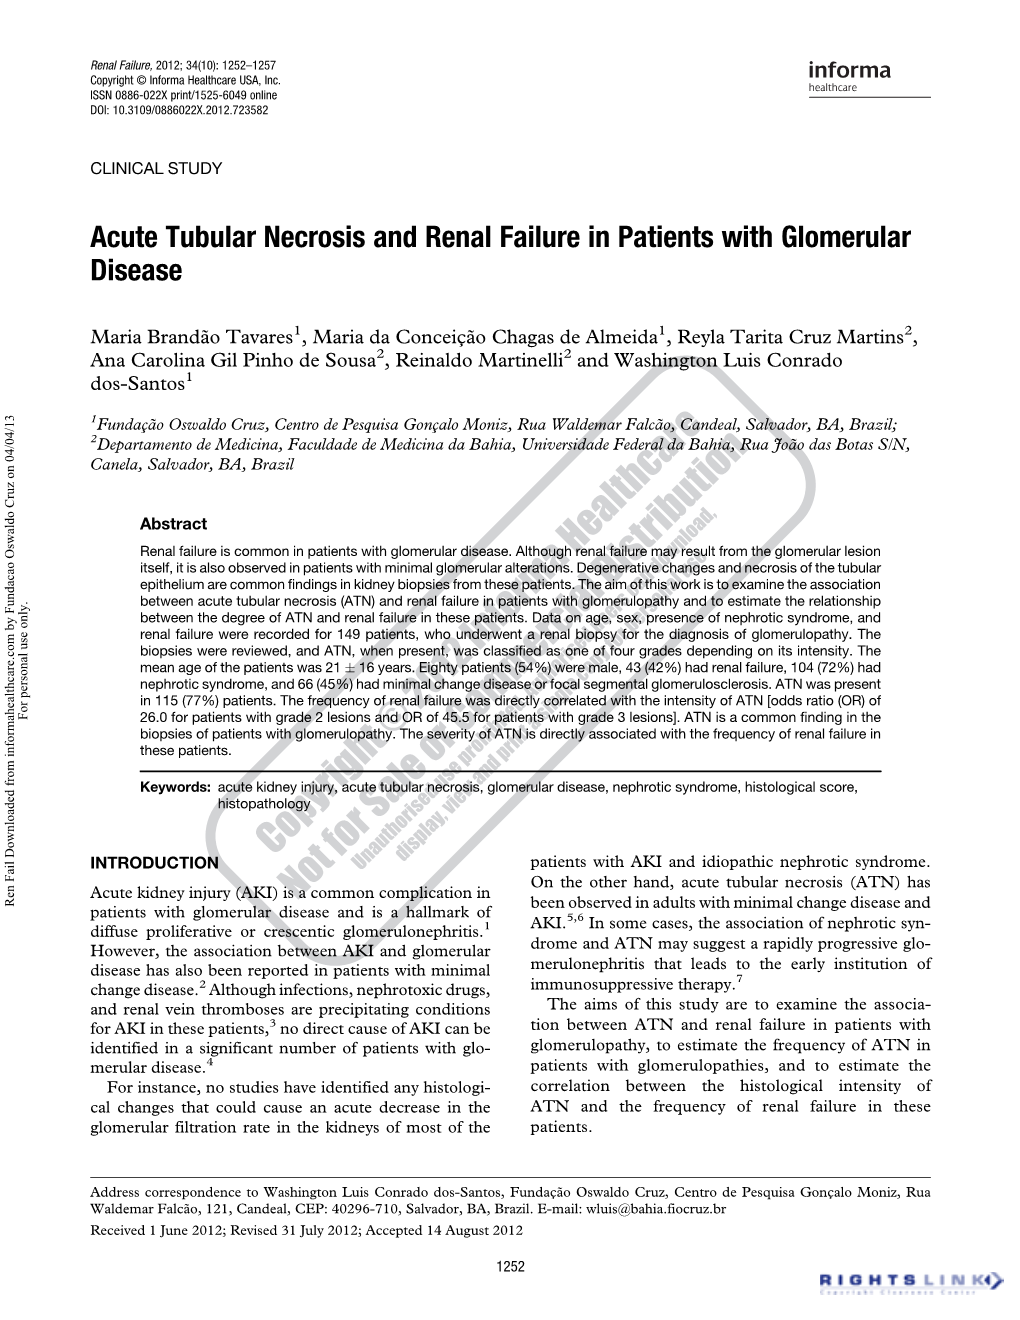 Acute Tubular Necrosis and Renal Failure in Patients with Glomerular Disease